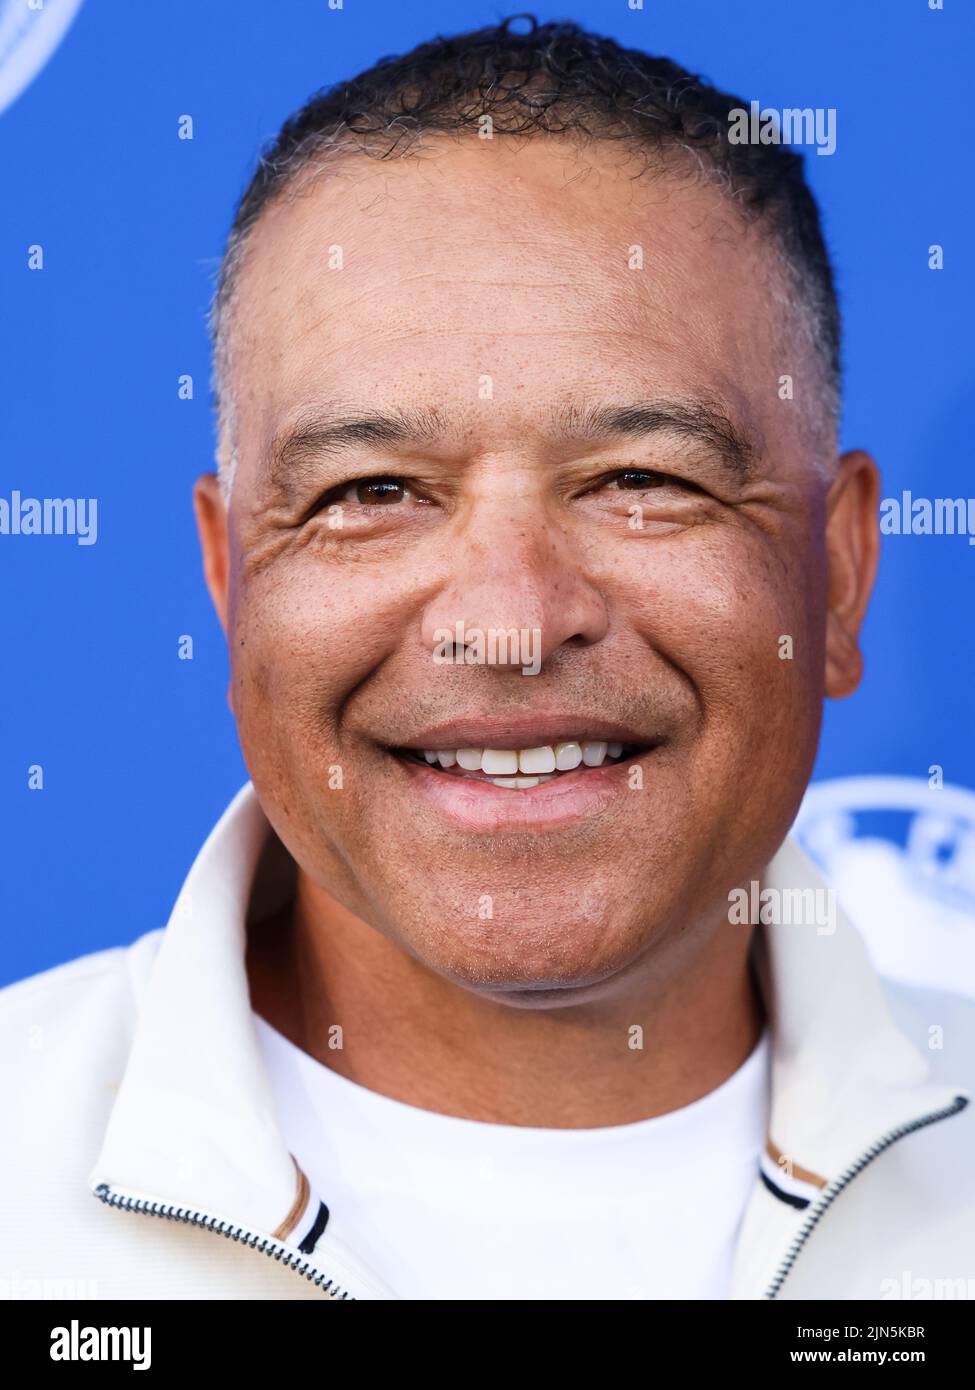 Los Angeles, United States. 08th Aug, 2022. ELYSIAN PARK, LOS ANGELES, CALIFORNIA, USA - AUGUST 08: American professional baseball manager and former outfielder who is the manager of the Los Angeles Dodgers of Major League Baseball Dave Roberts (Doc) arrives at Kershaw's Challenge Ping Pong 4 Purpose 2022 held at Dodger Stadium on August 8, 2022 in Elysian Park, Los Angeles, California, United States. (Photo by Xavier Collin/Image Press Agency) Credit: Image Press Agency/Alamy Live News Stock Photo